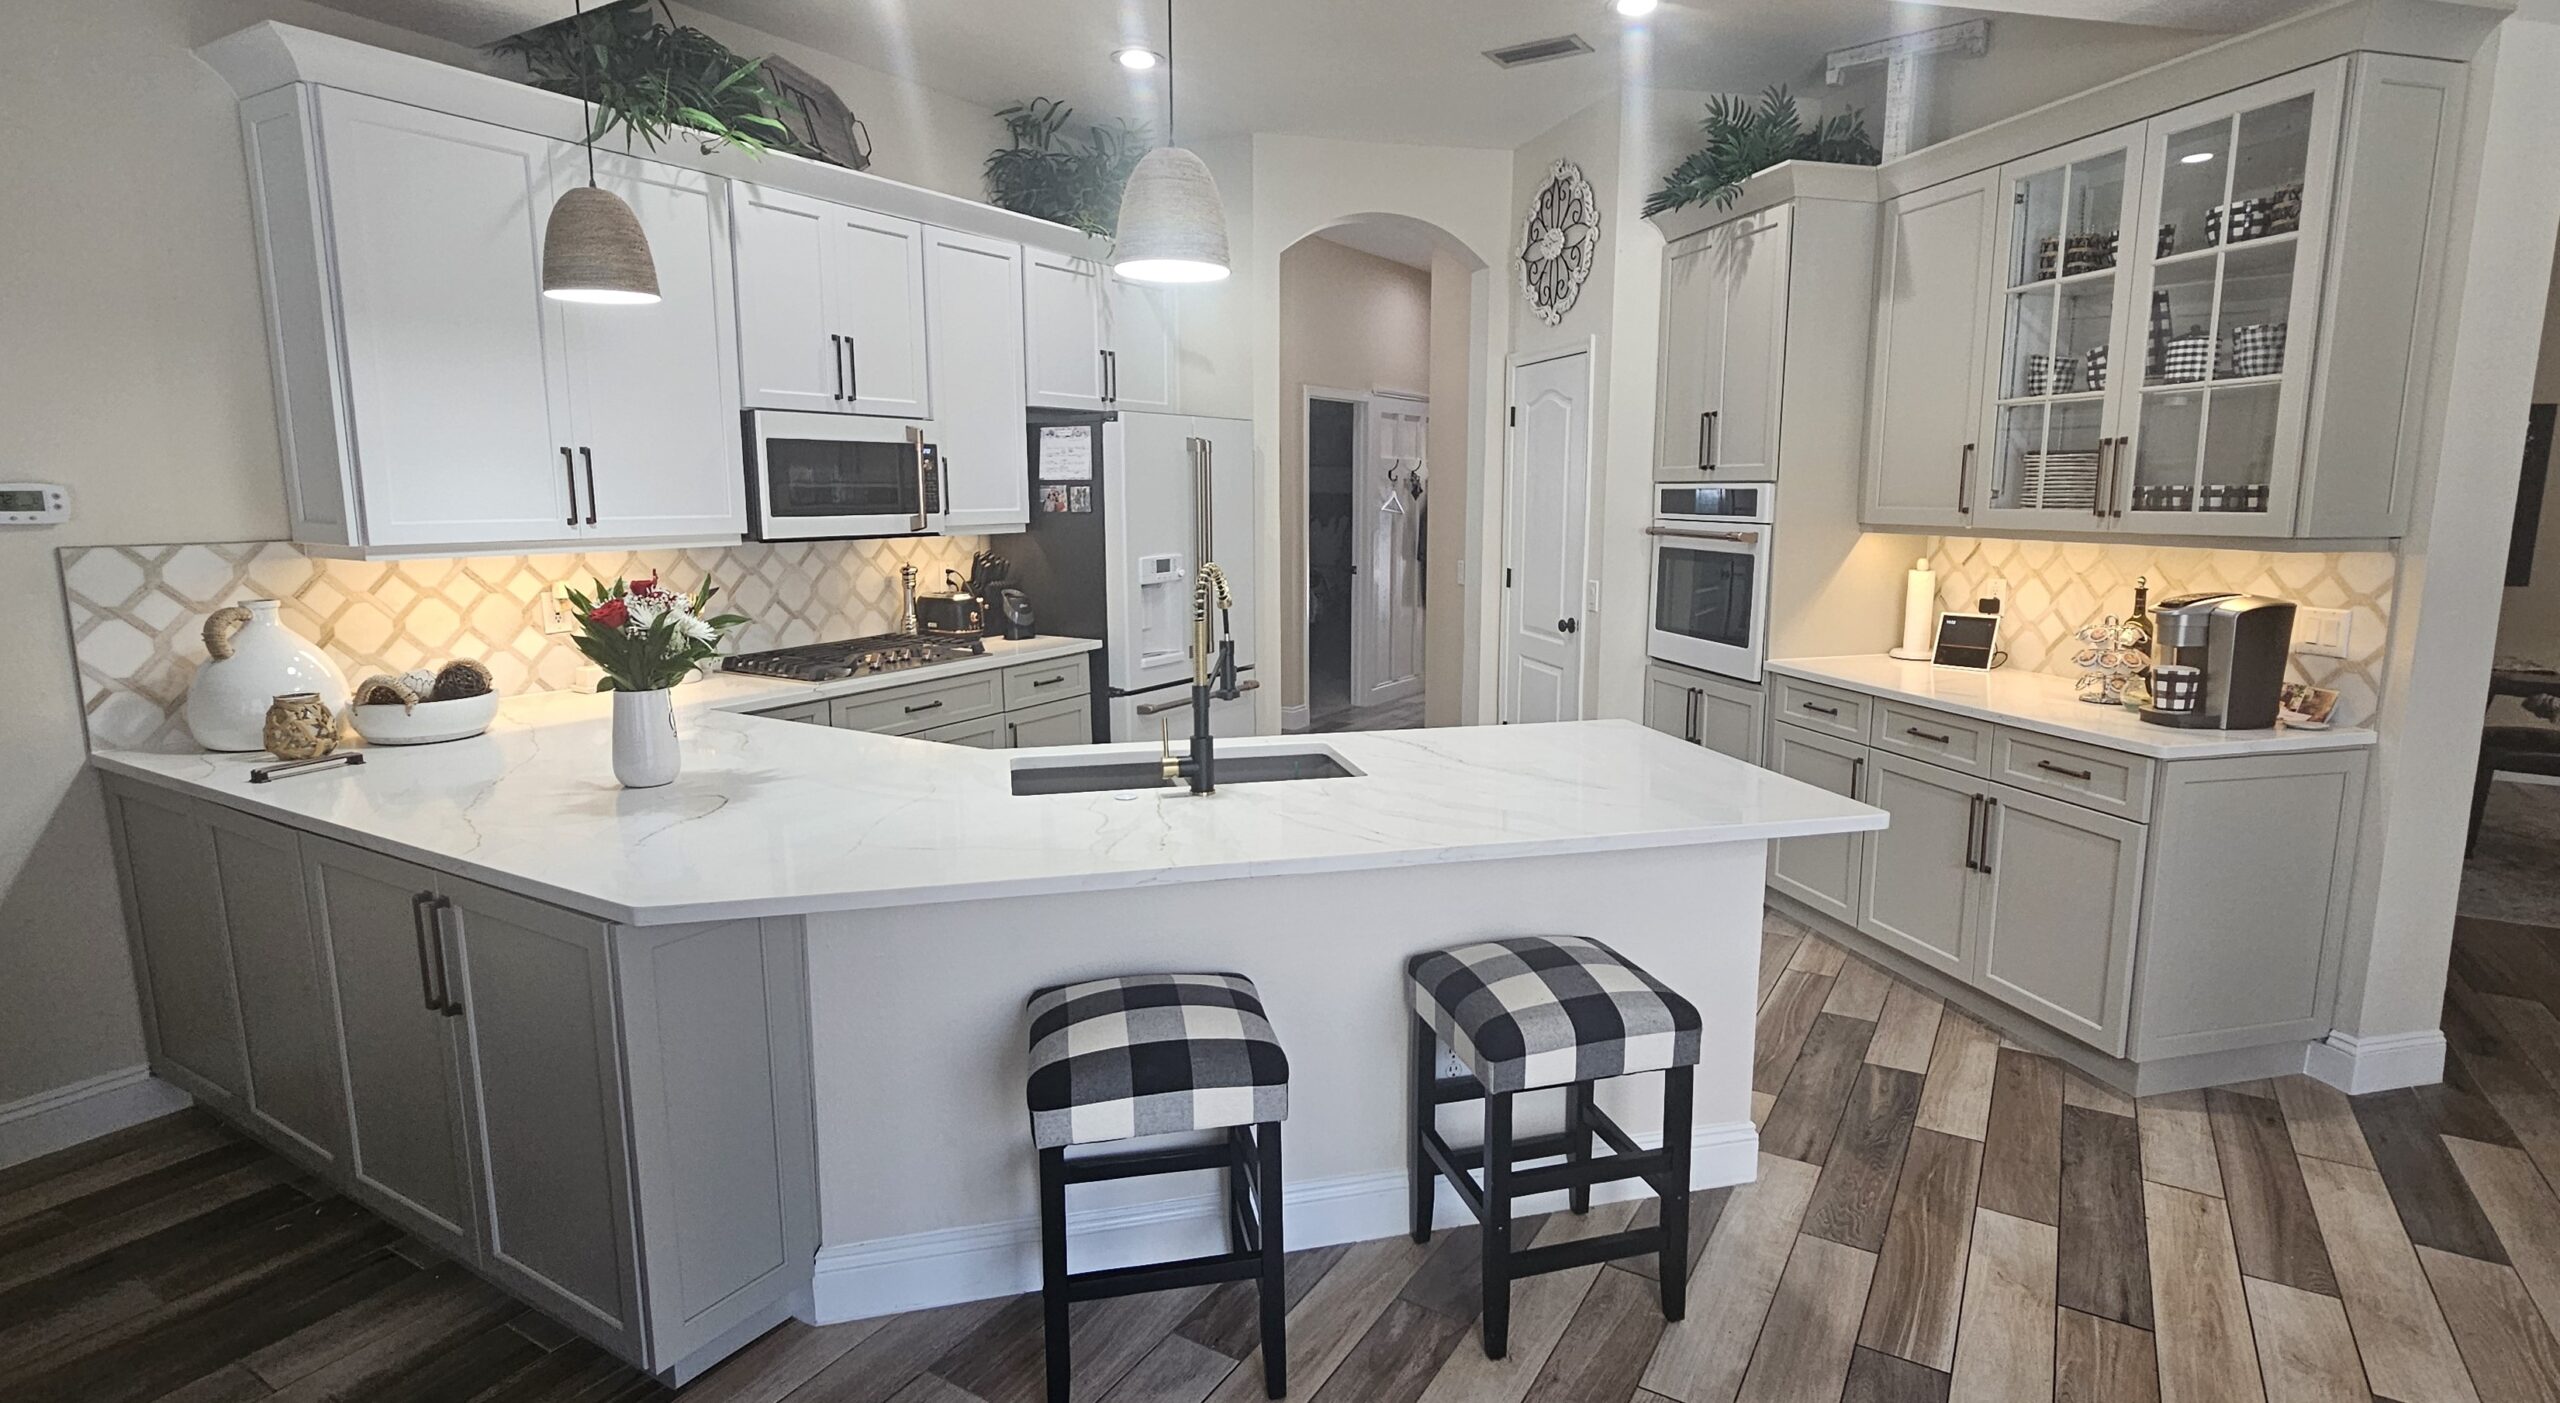 Modern appliances with a high-quality finish, granite worktops, and sleek white cabinet doors in Trinity 